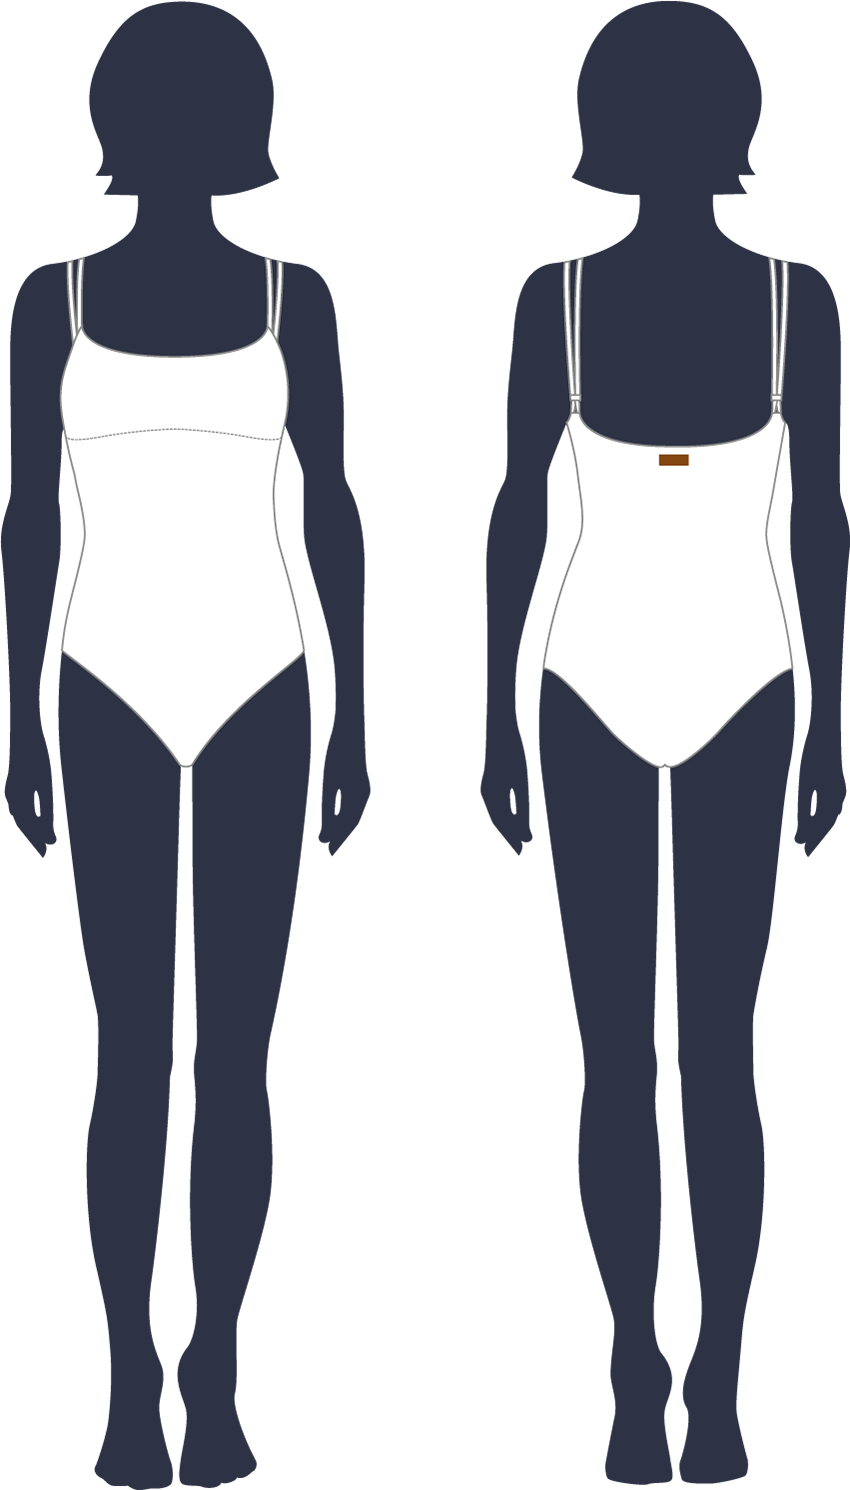 ONE-PIECE-SWIMSUITS